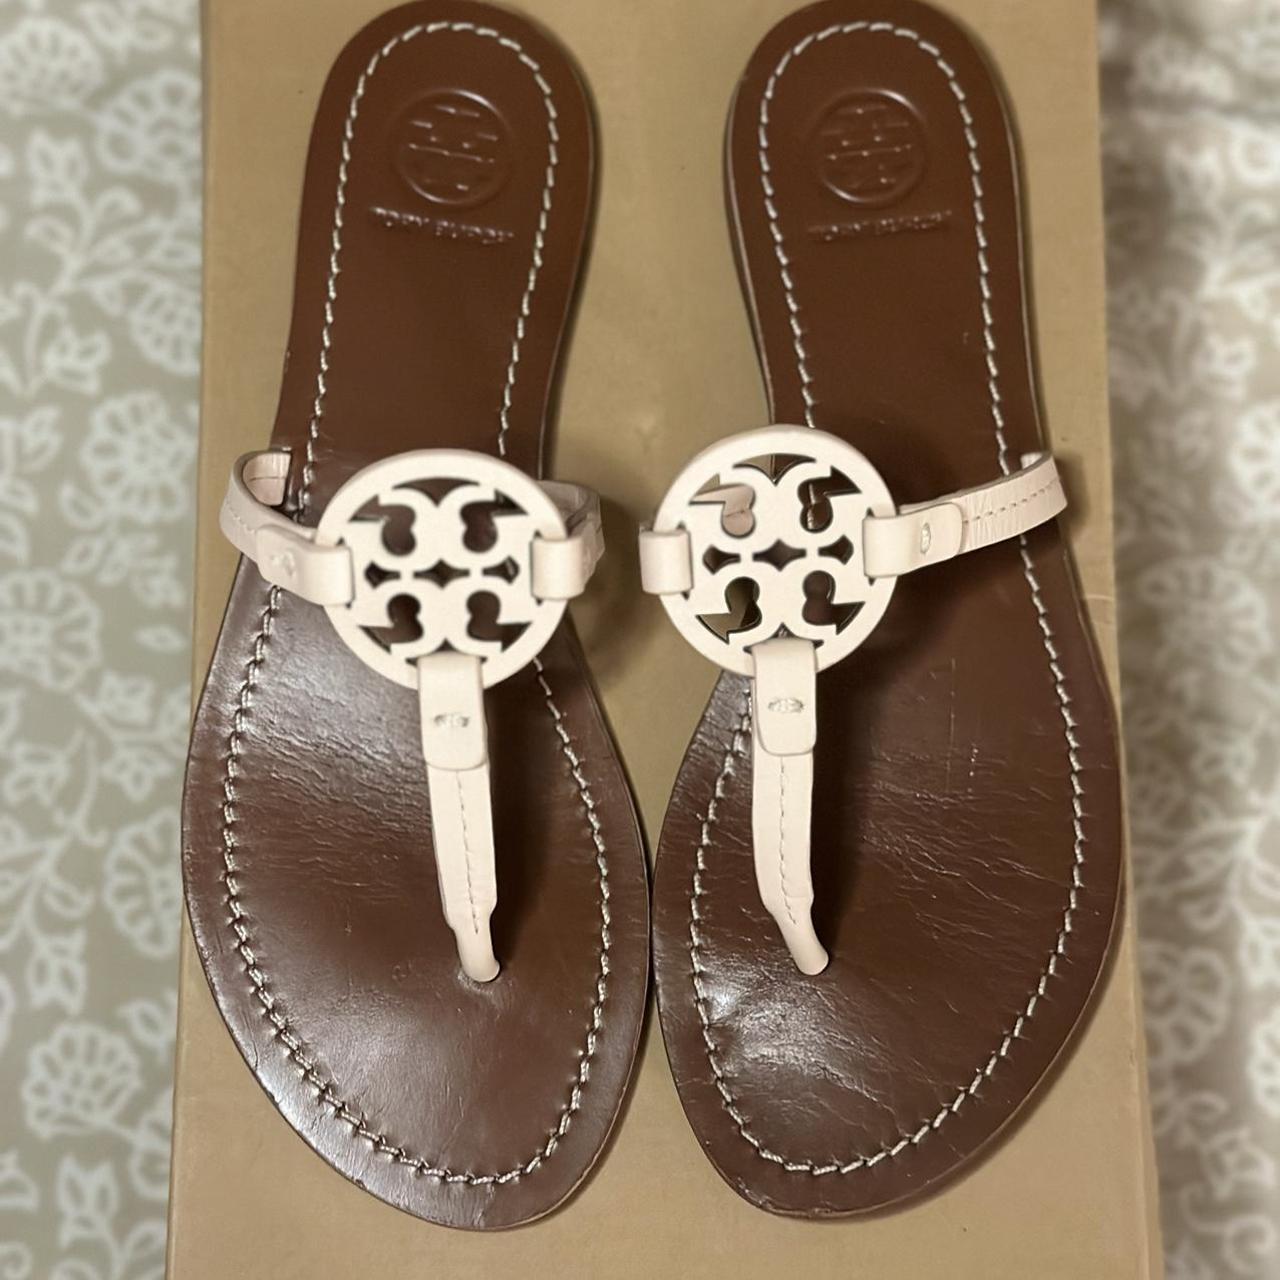 Tory Burch Miller Sandals in Pink